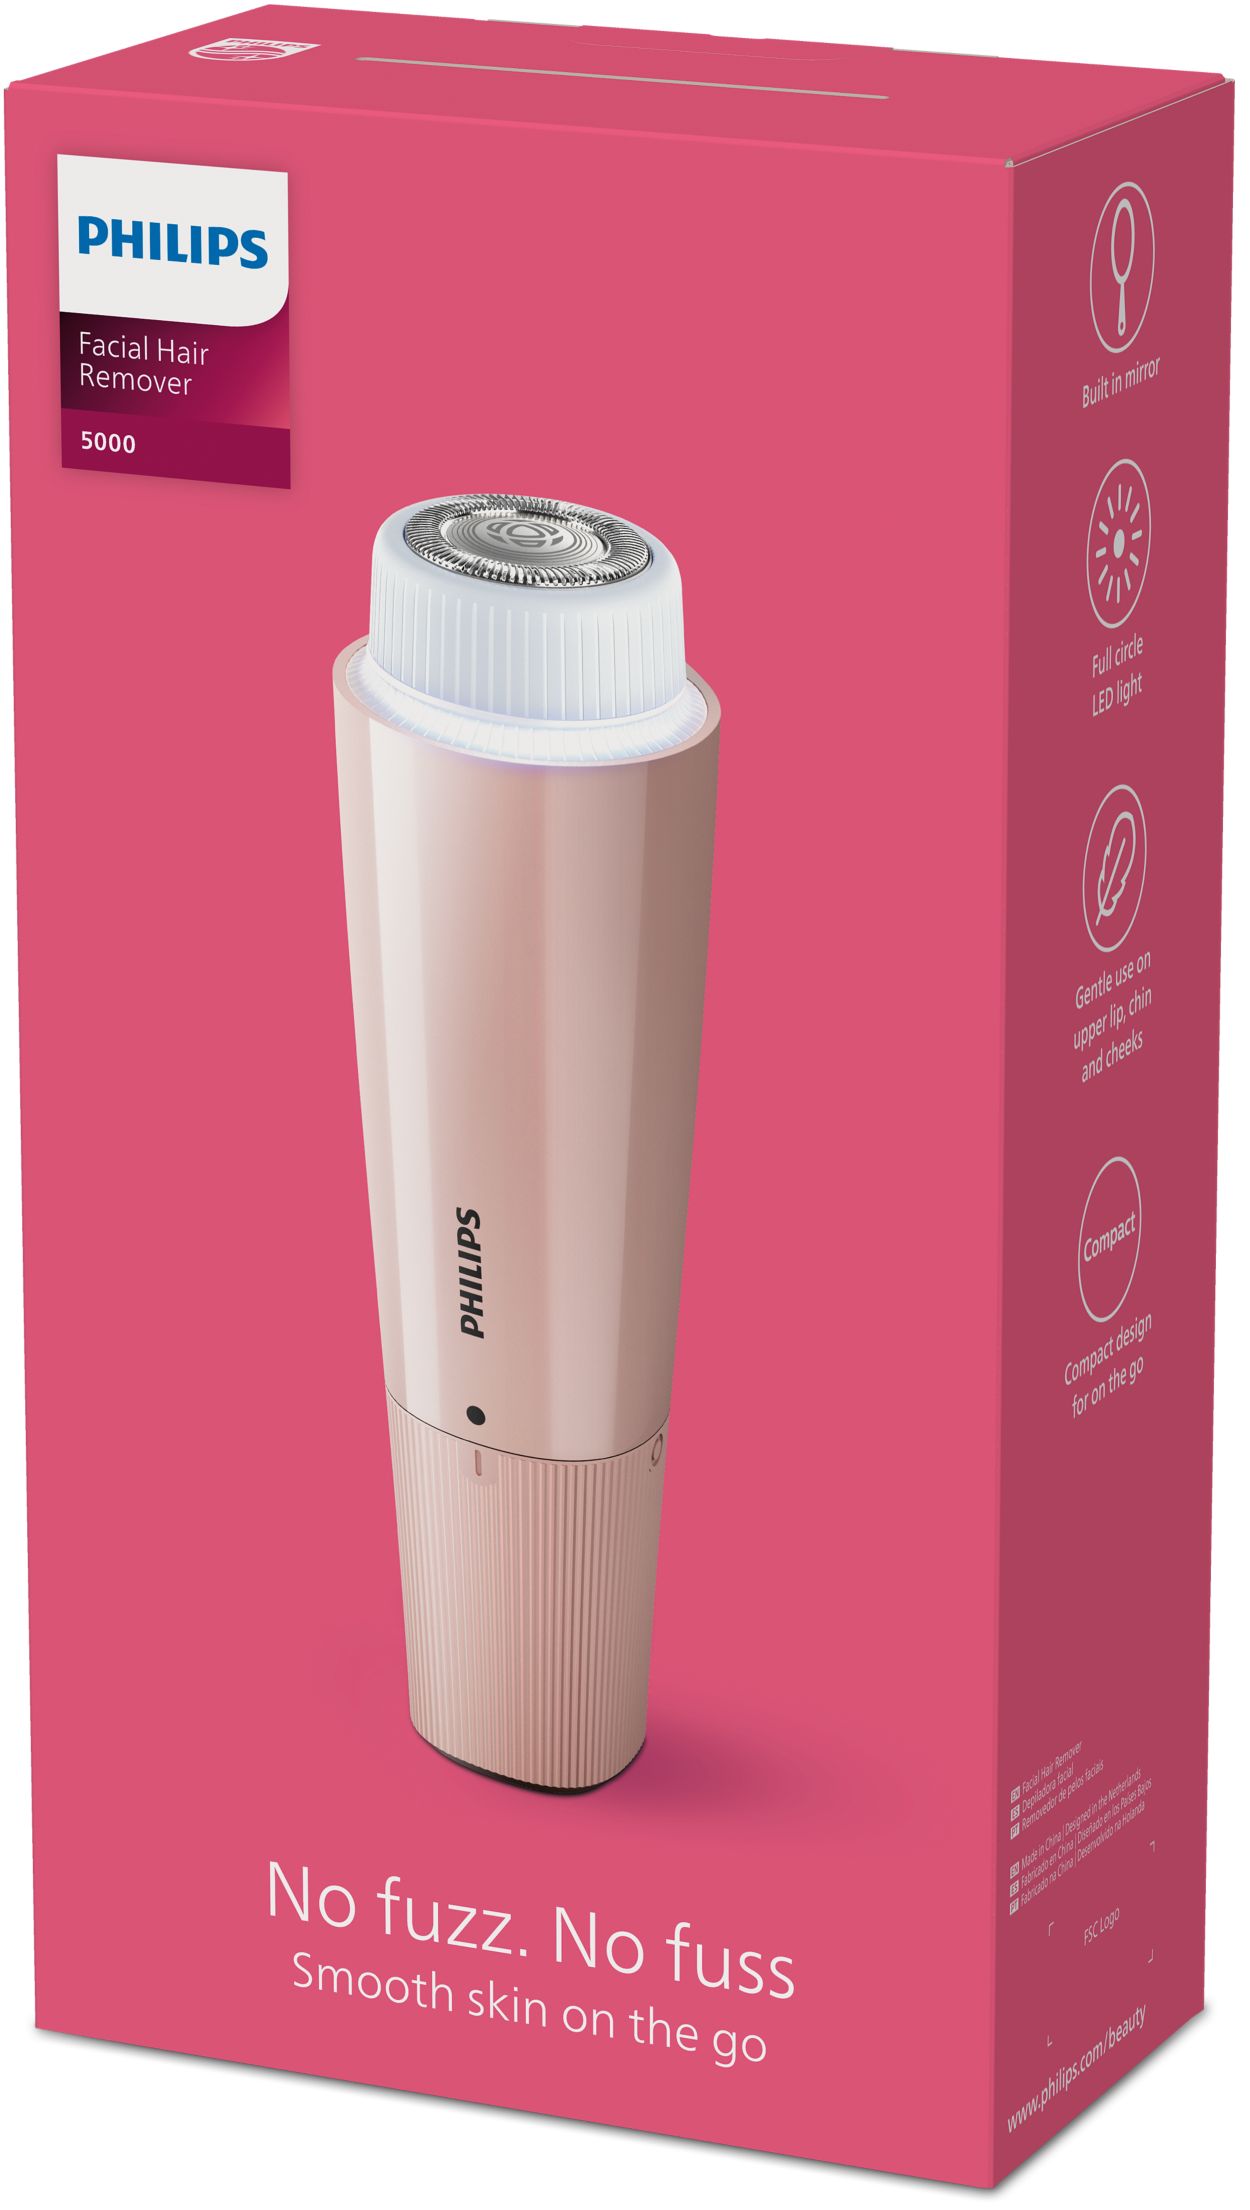 Philips, Facial Hair Remover Series 5000